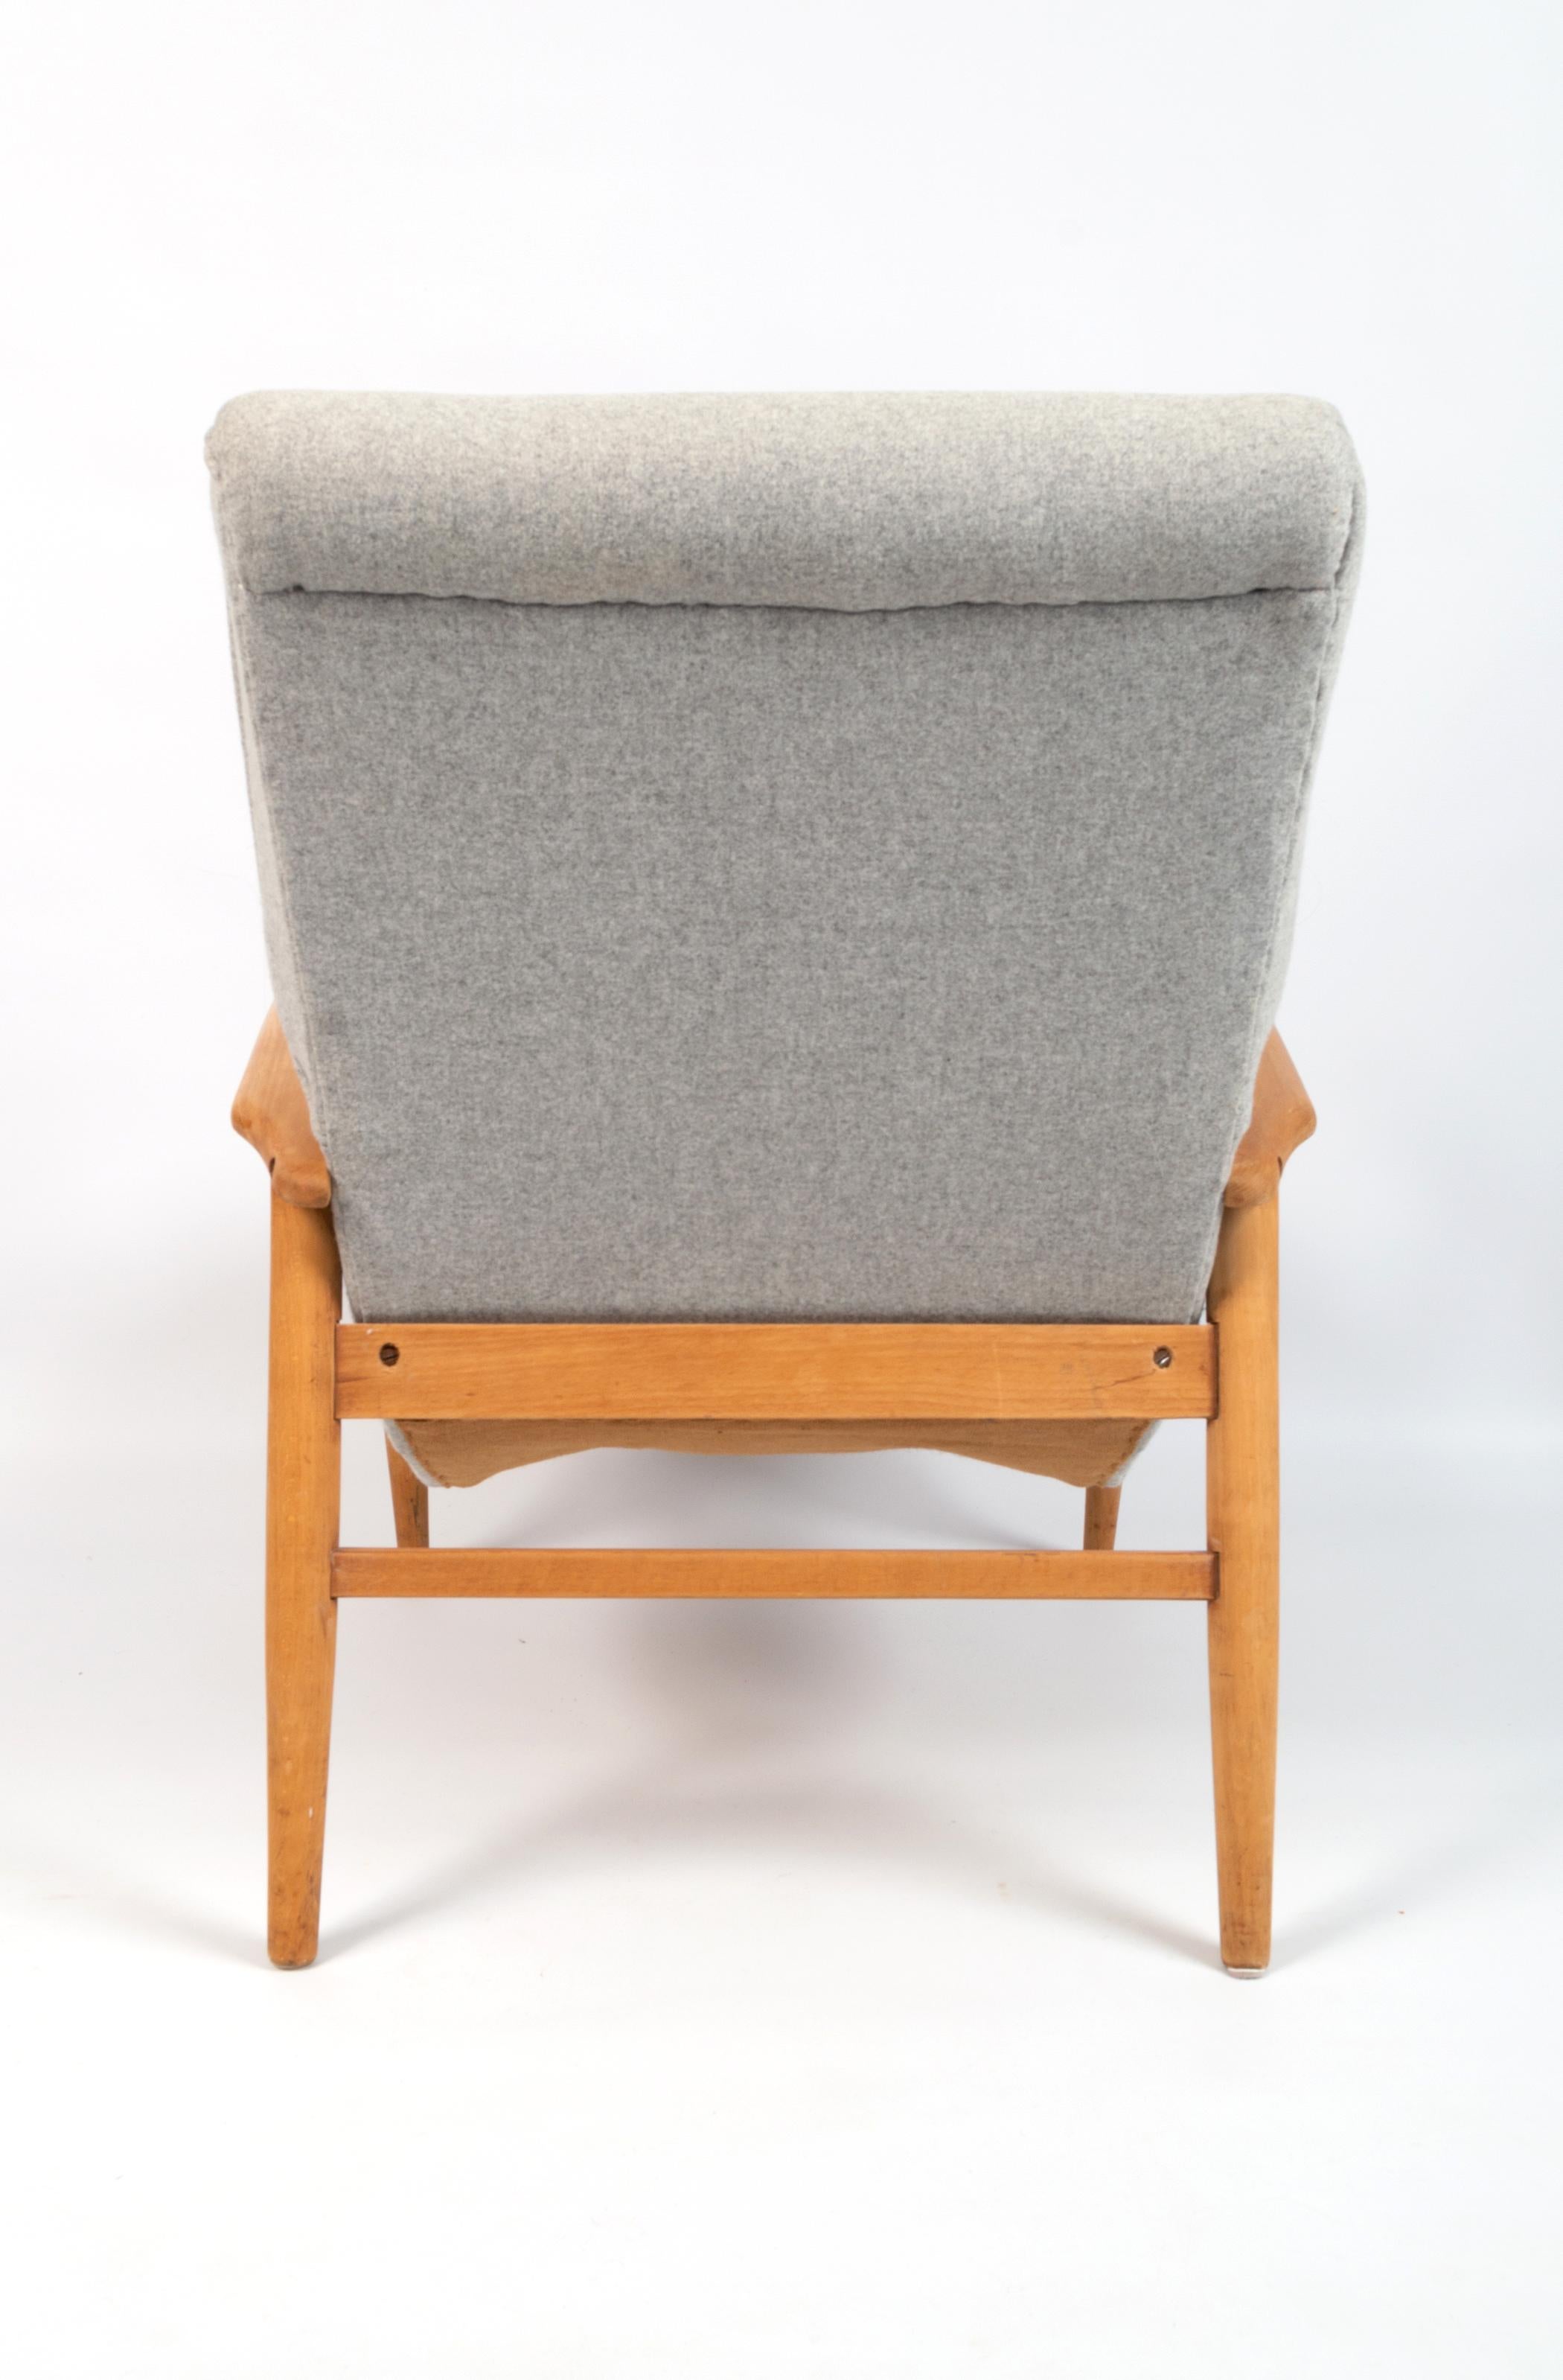 Pair of Mid-Century Danish Lounge Chairs Armchairs Denmark, C.1950 For Sale 4